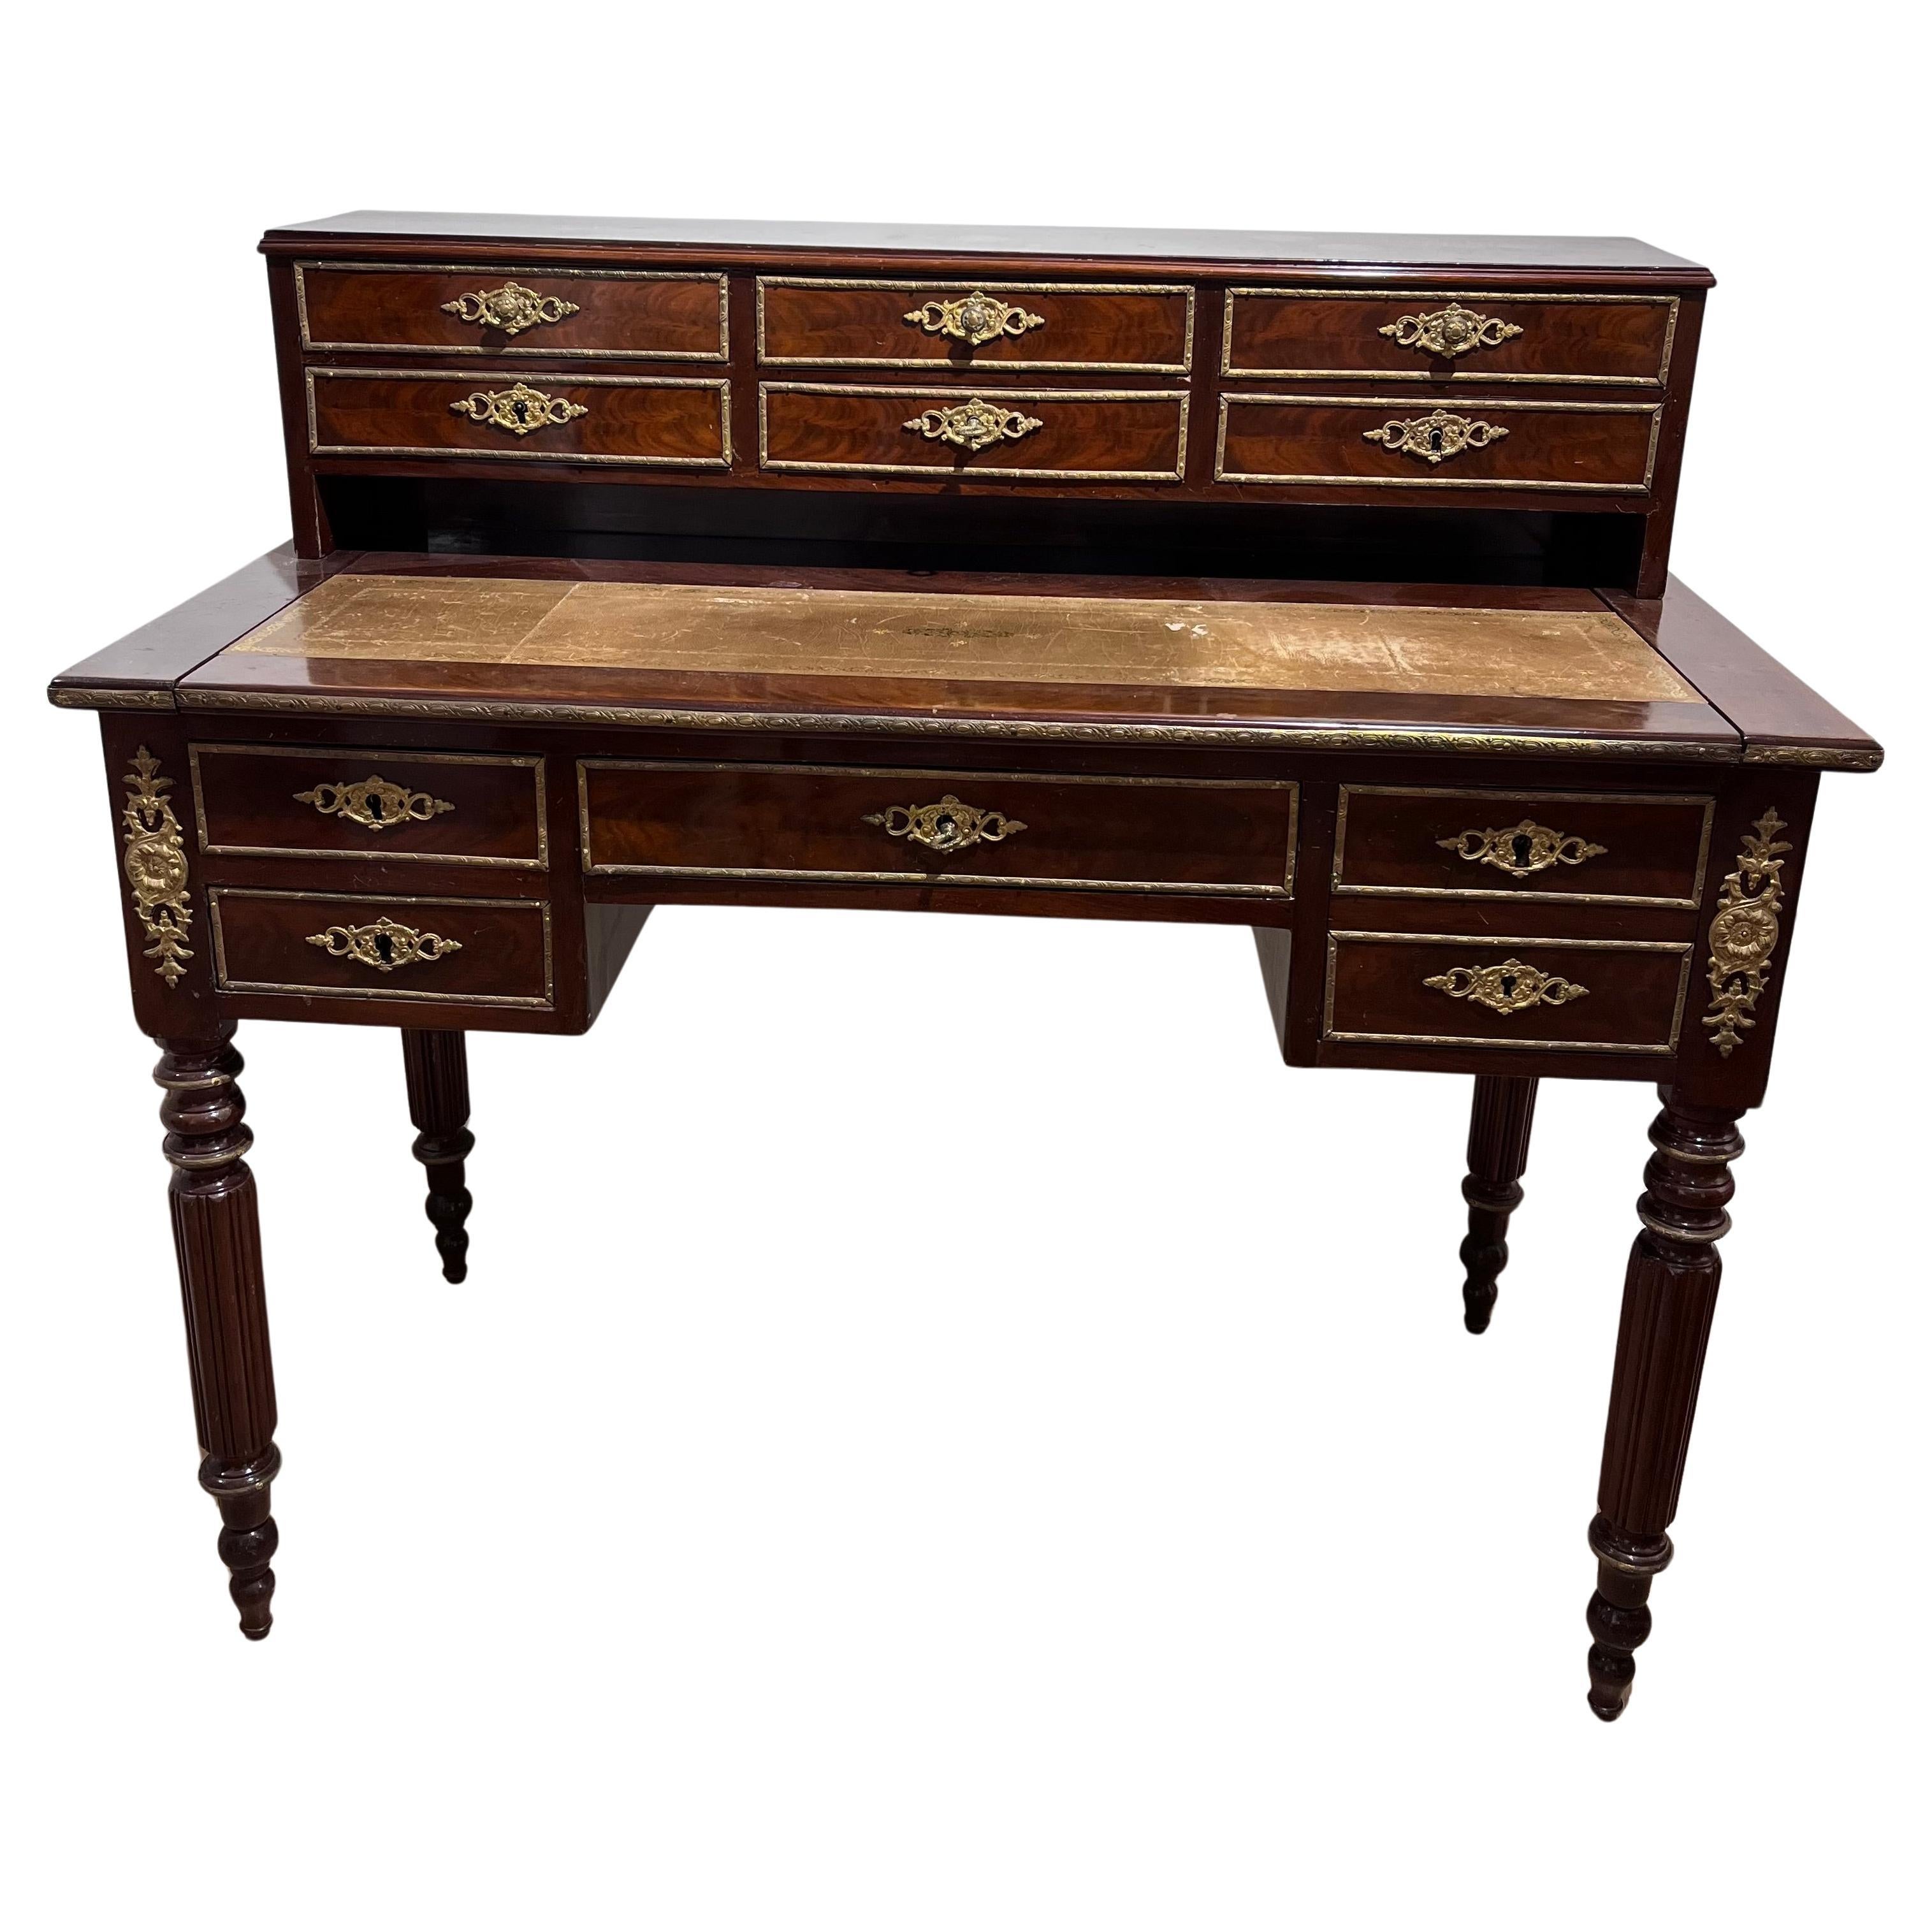 Mahogany Centrepiece Desk with Drawers France 19th Century For Sale